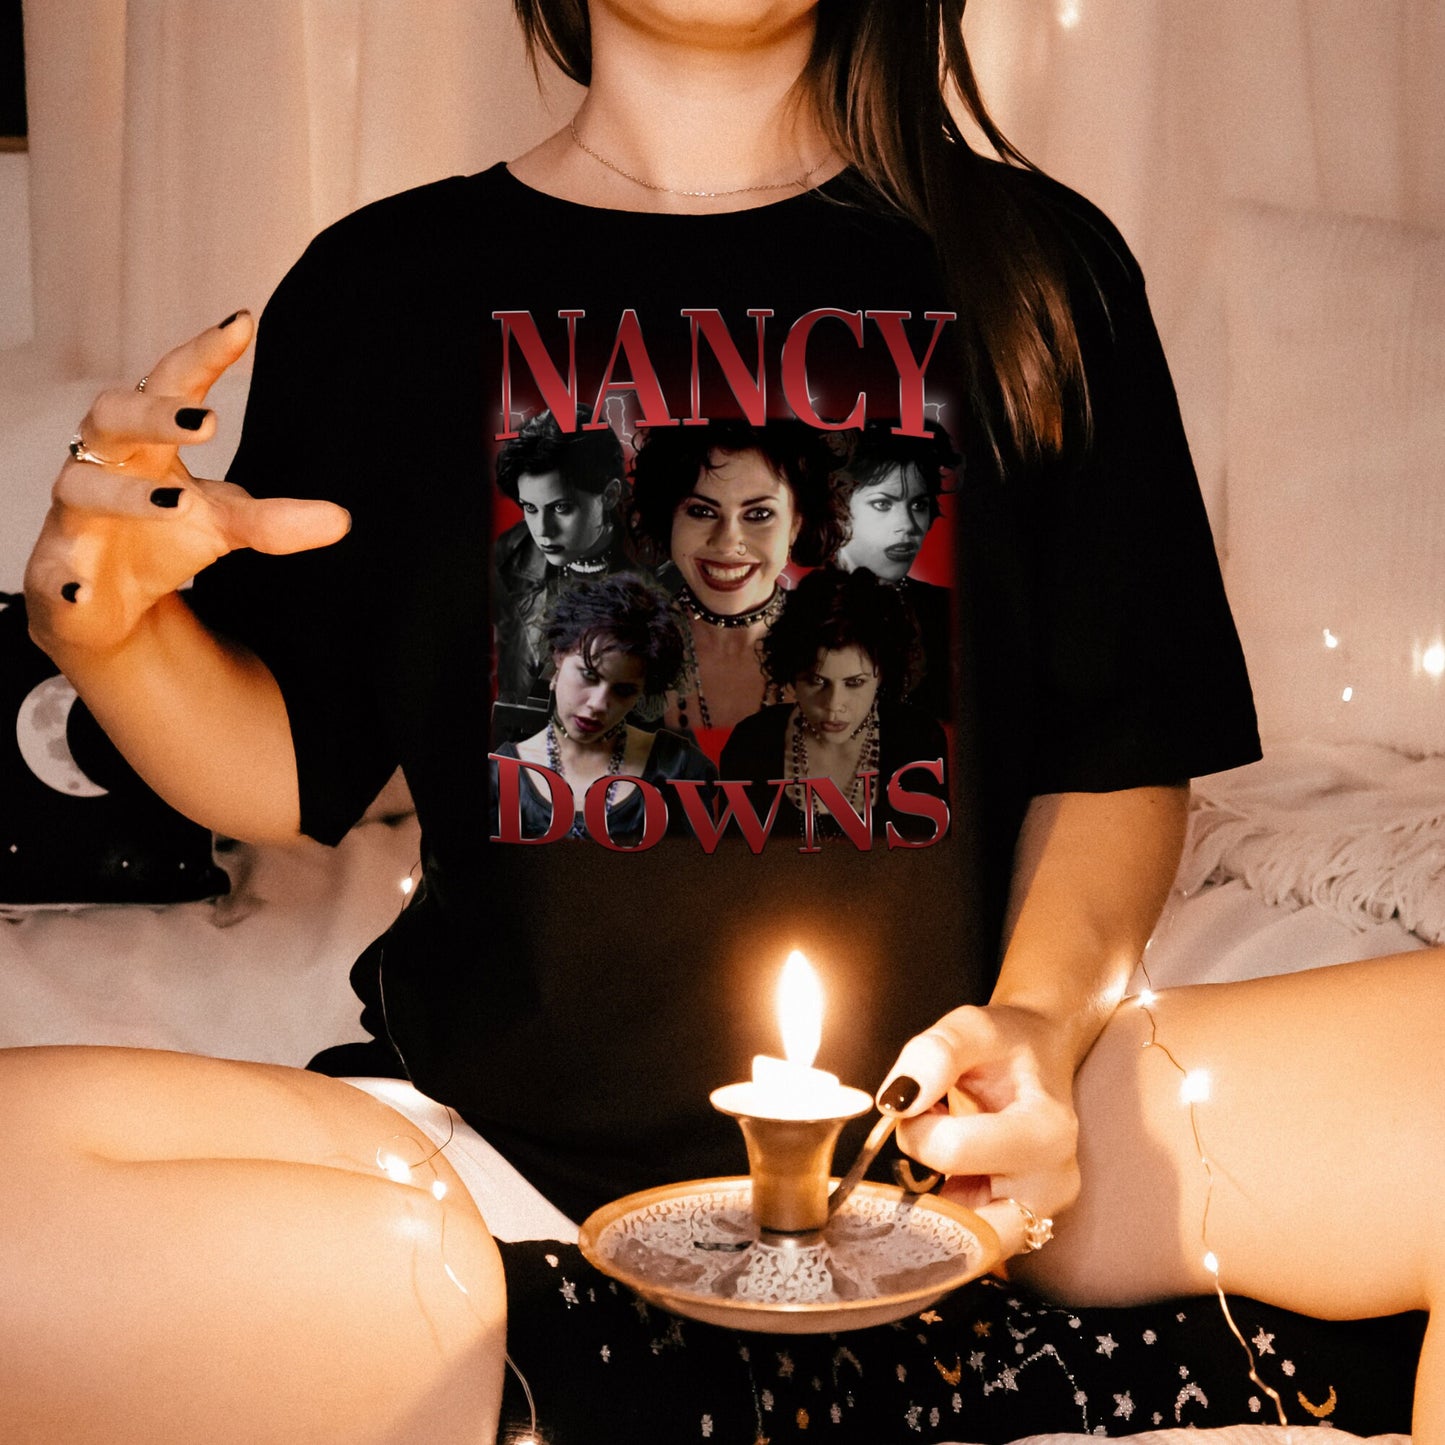 Nancy Downs The Craft Shirt, The Craft, Retro 90s shirt, Fairuza Balk. 90's Witches, Witchcraft, Witchy shirt